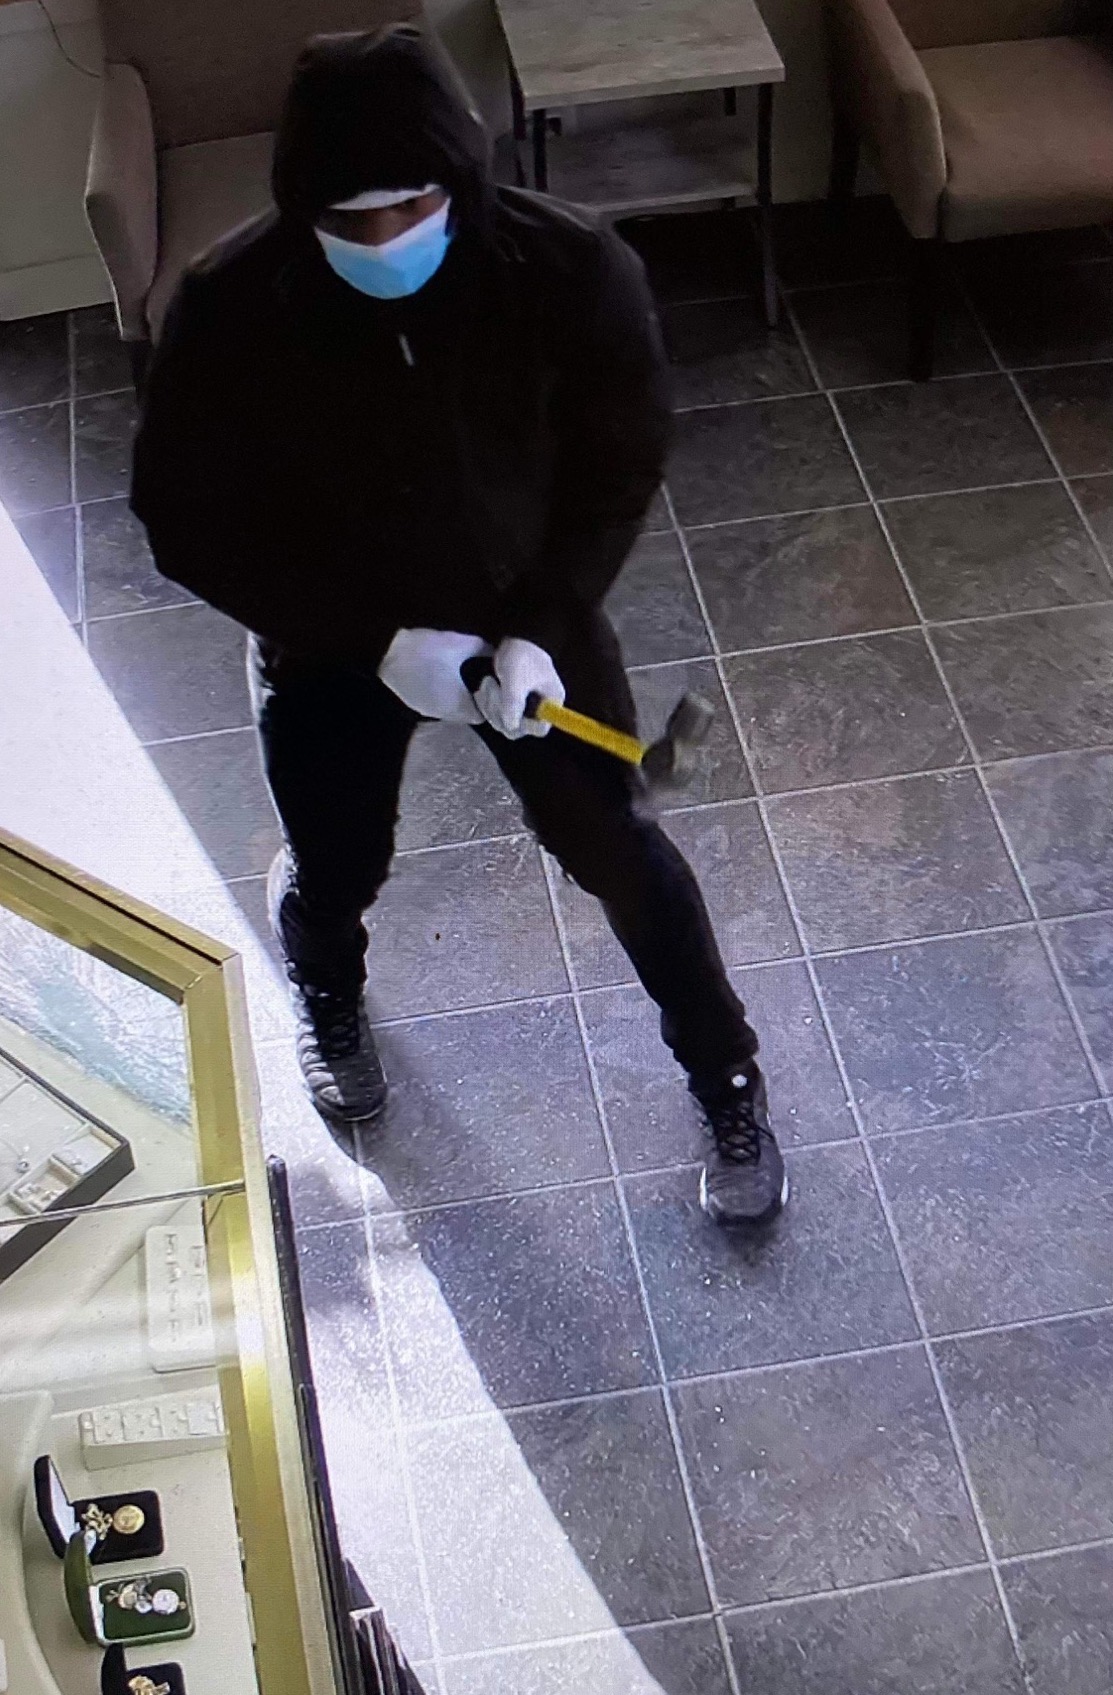 suspect with hammer